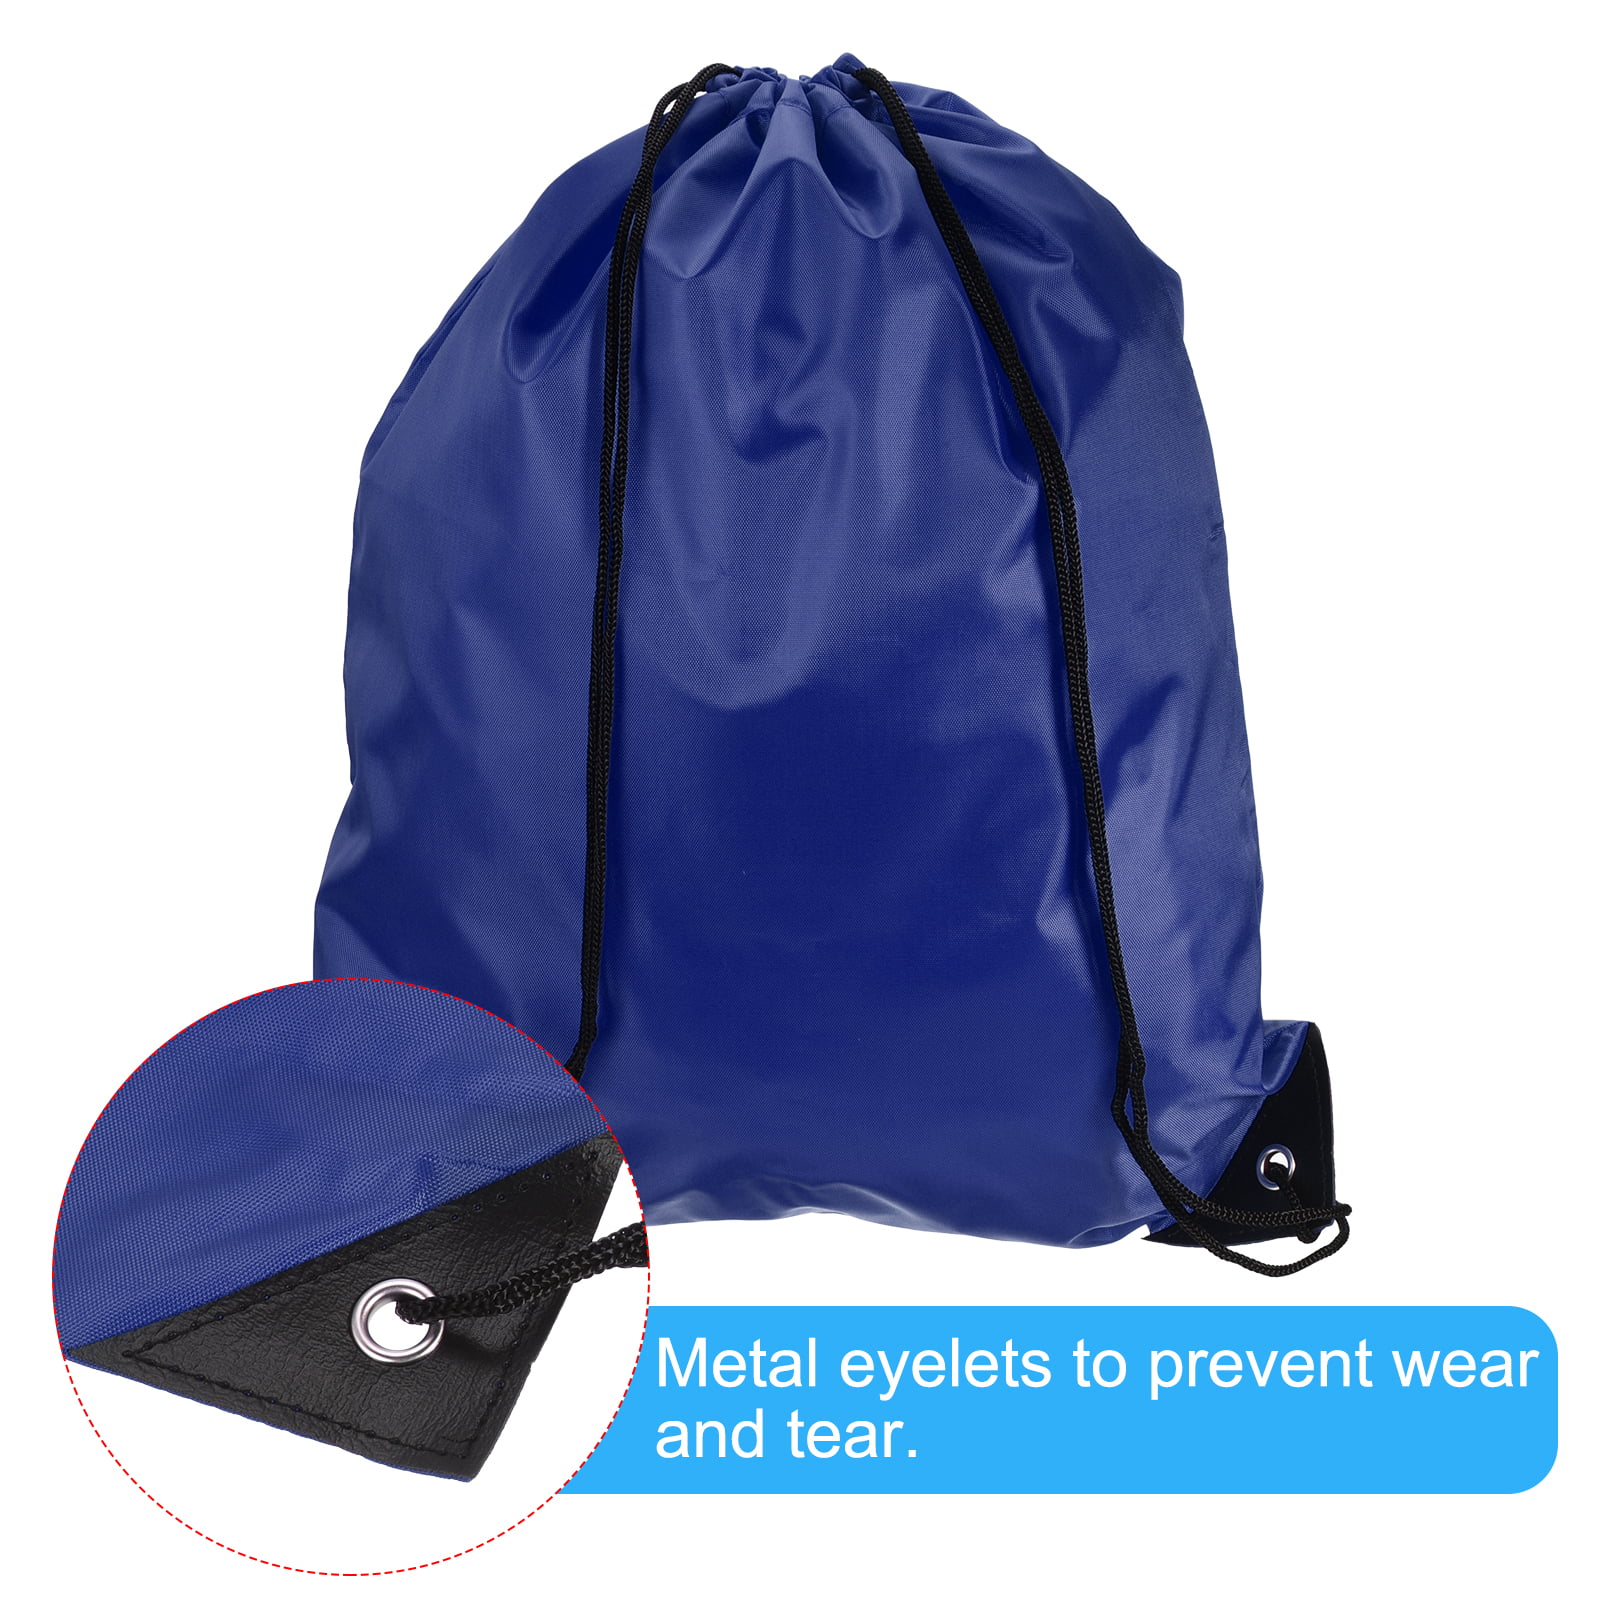 Bag of Holding Drawstring Bag for Sale by jomuxc